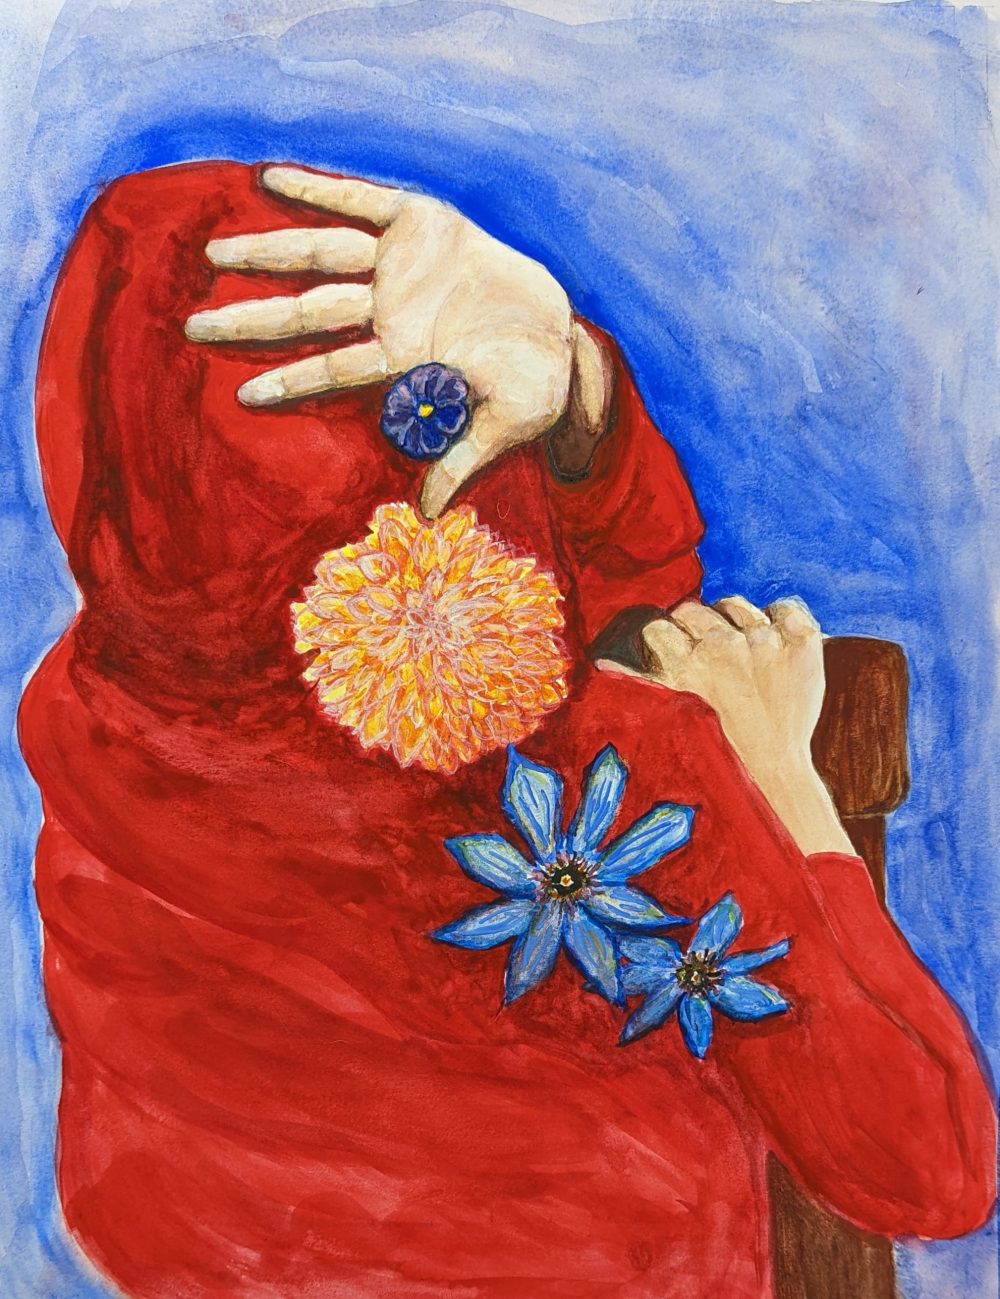 A watercolor showing the back of a person in a vivid red hoodie with a hand rejecting interaction with the viewer.